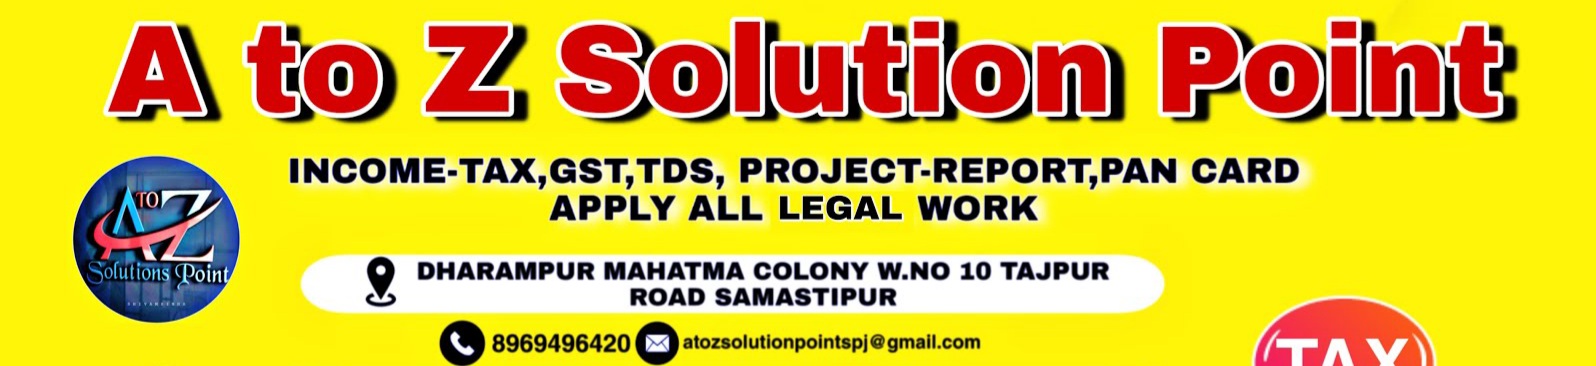 A to Z Solution Point. - Logo